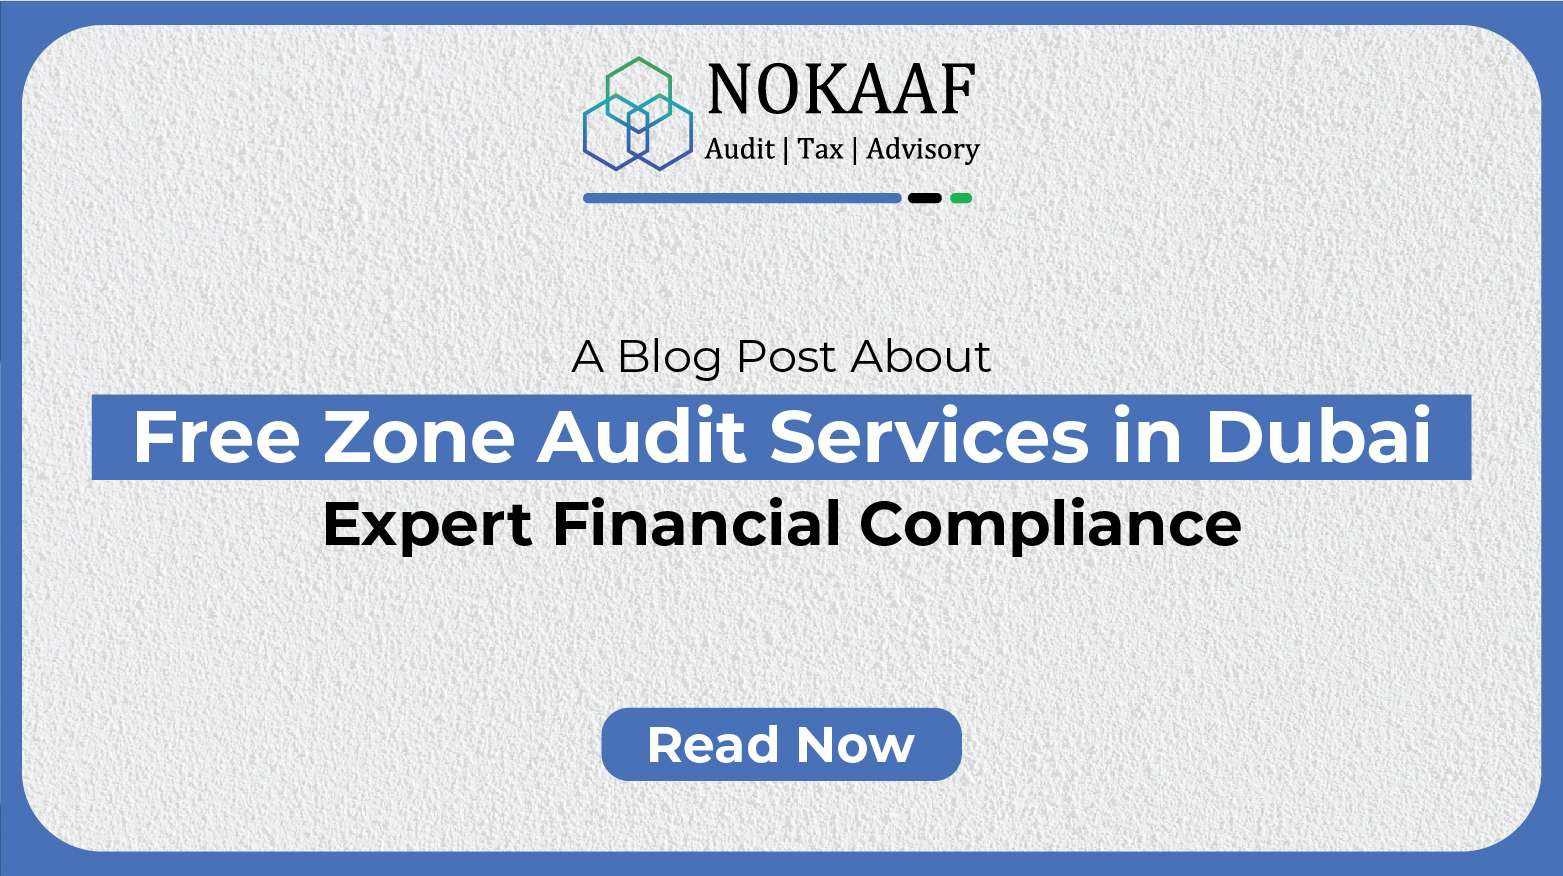 Free Zone Audit Services in Dubai